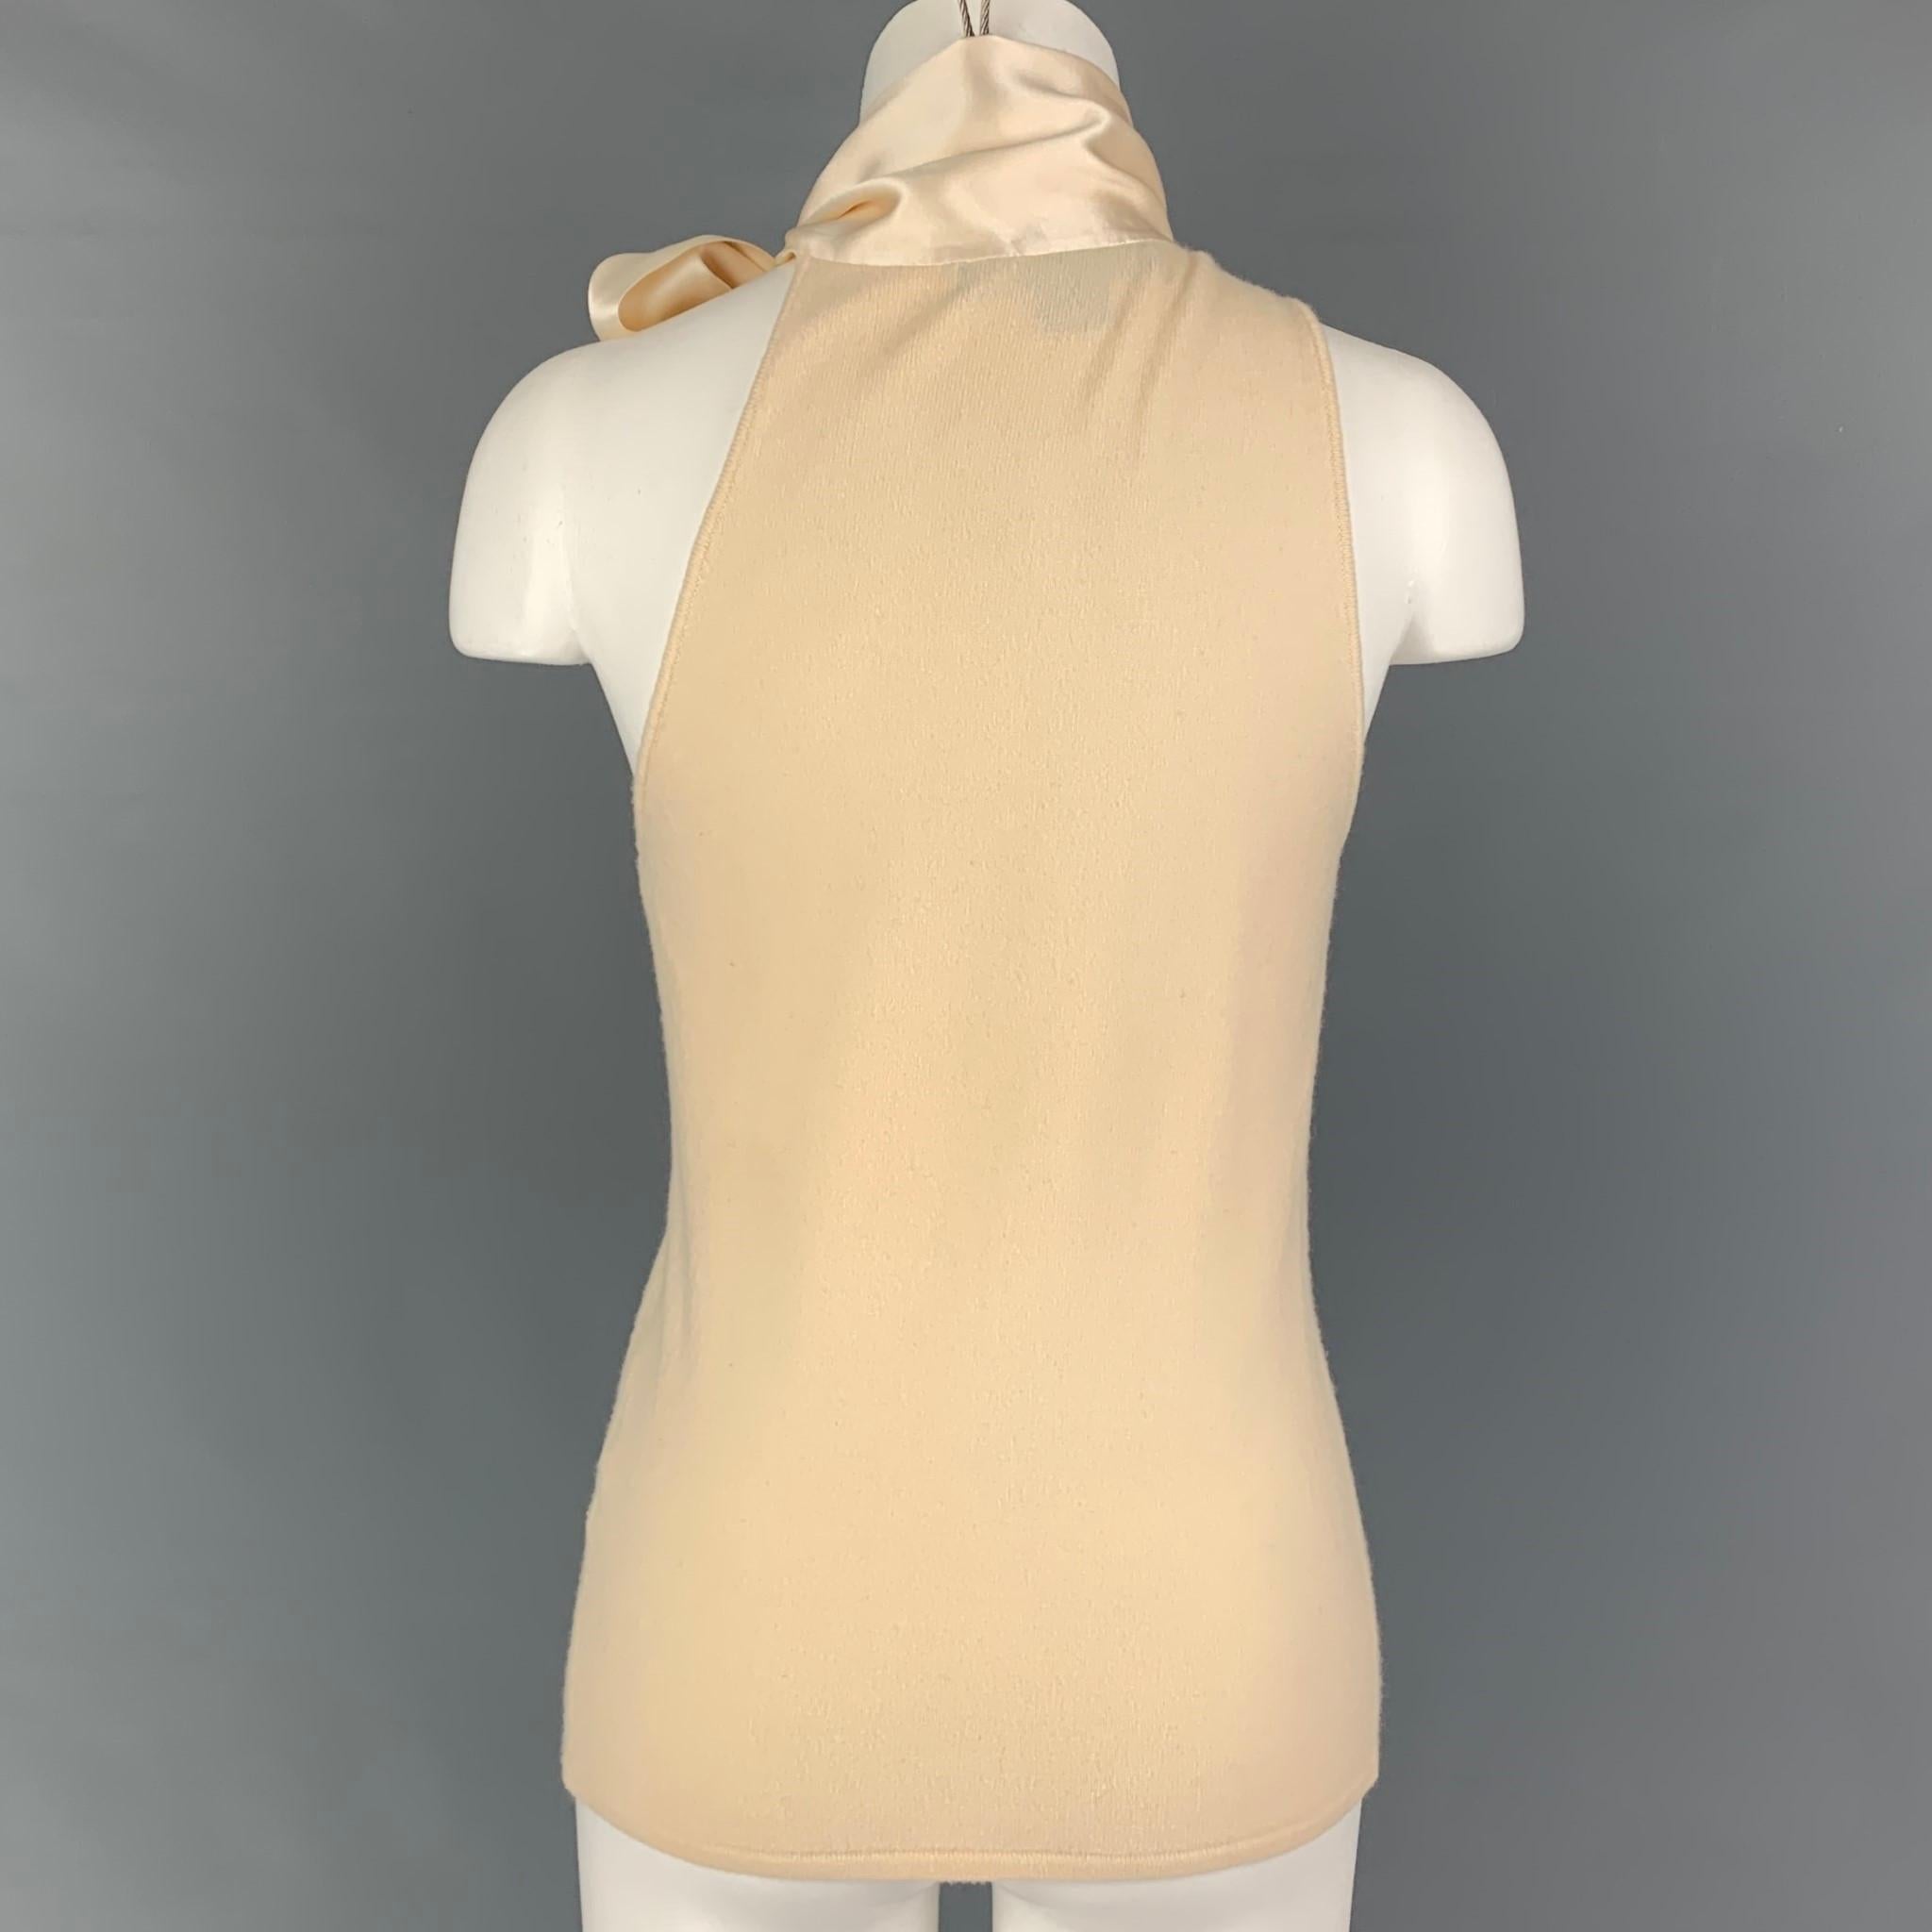 RALPH LAUREN 'Black Label' dress top comes in a cream cashmere featuring a sleeveless style and a self tie silk scarf design.

Very Good Pre-Owned Condition. Fabric tag removed.
Marked: M

Measurements:

Bust: 31 in.
Length: 23 in